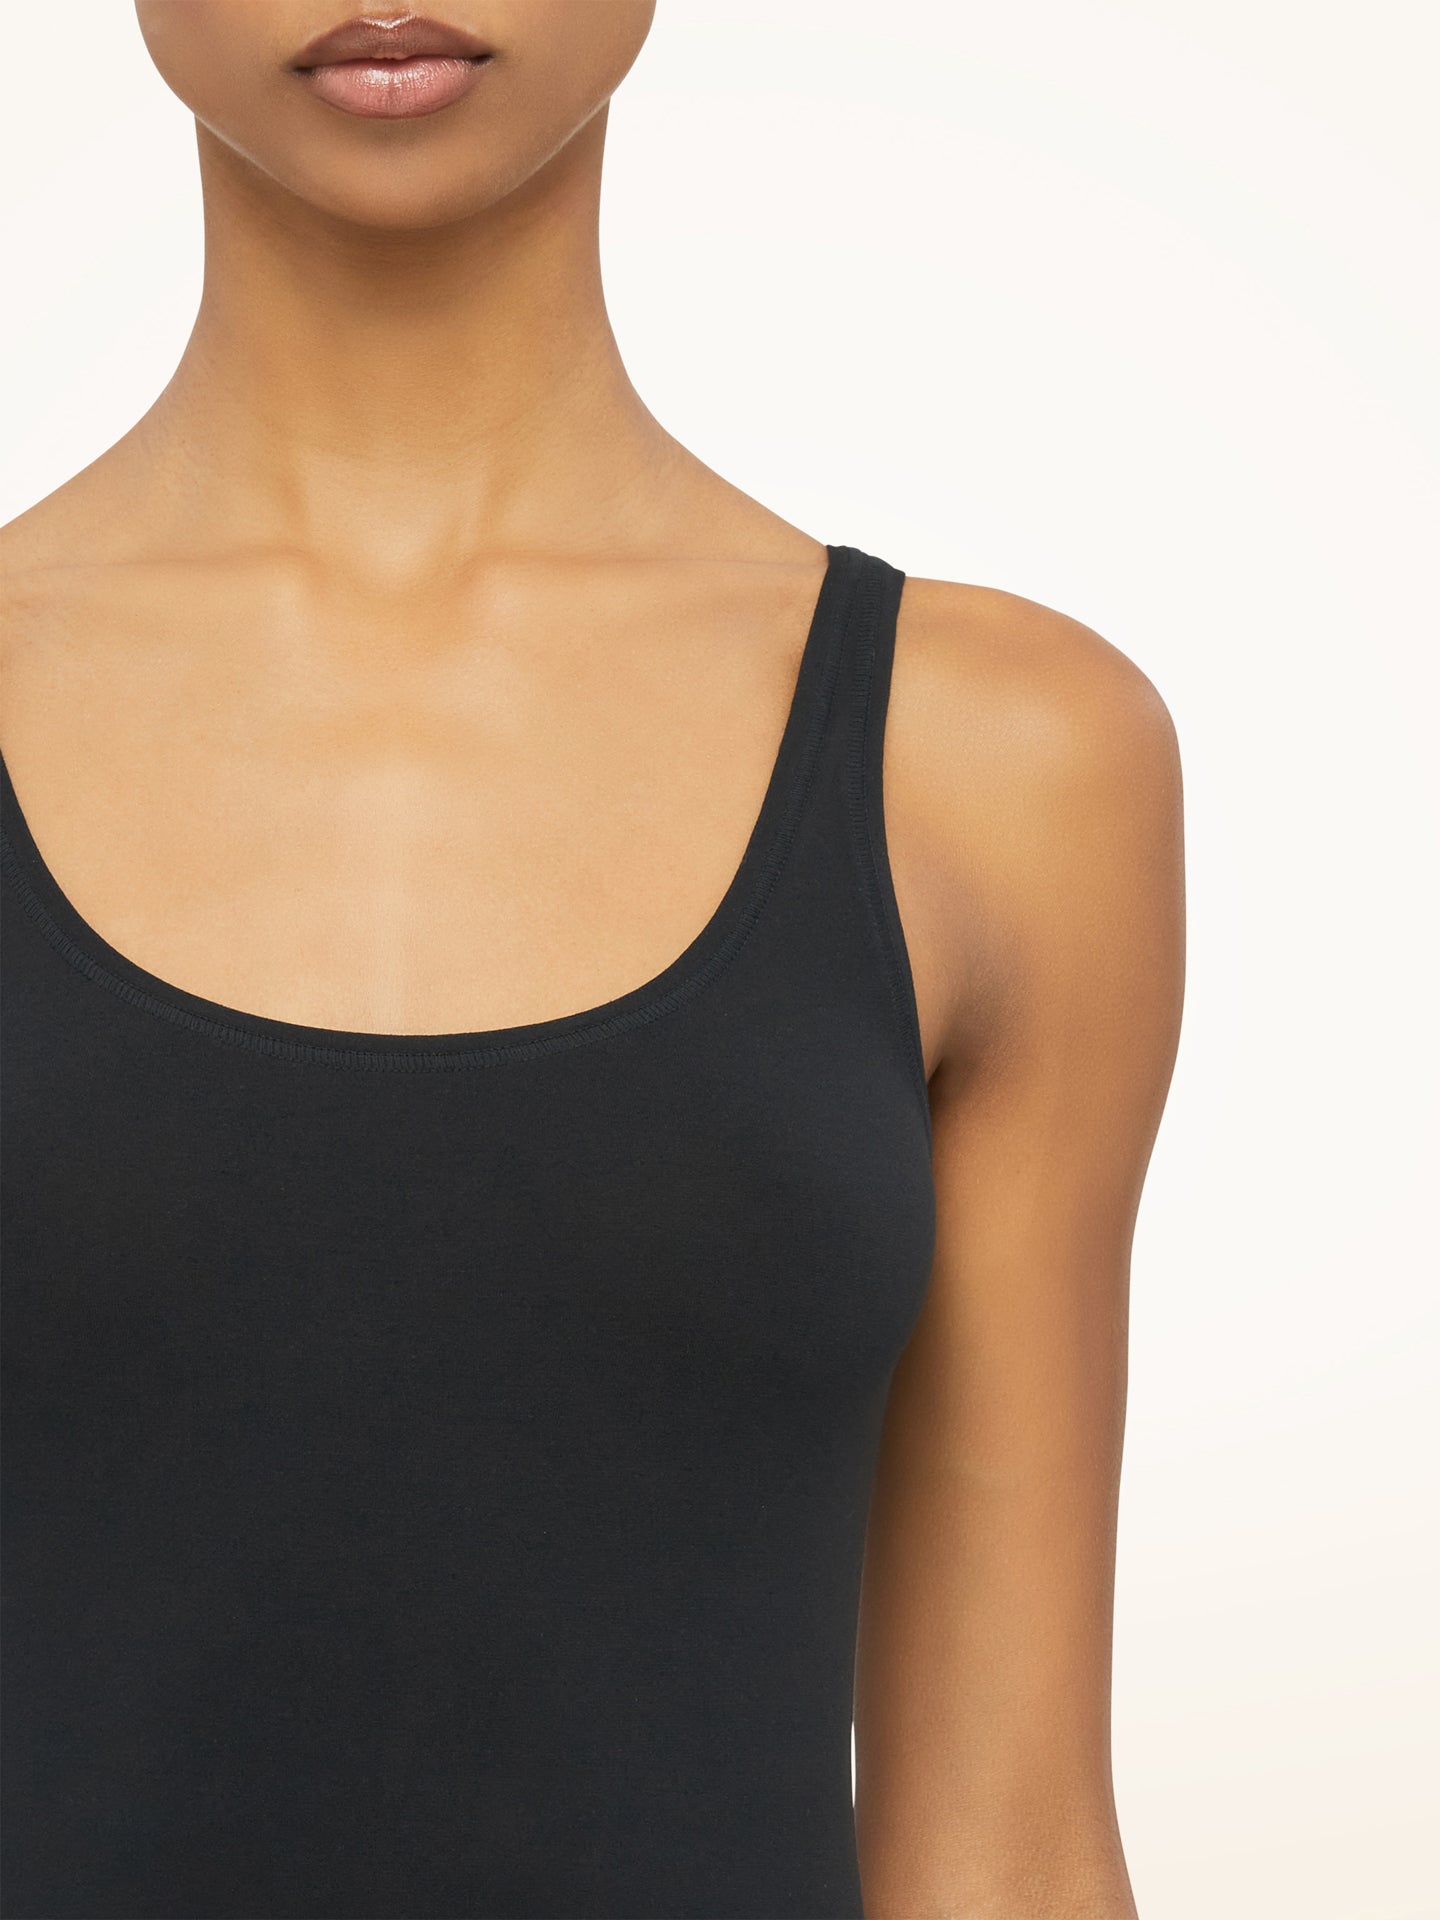 Havanna Top Sleeveless-Shirts-Wolford-OUTLET-ARCHIVIST